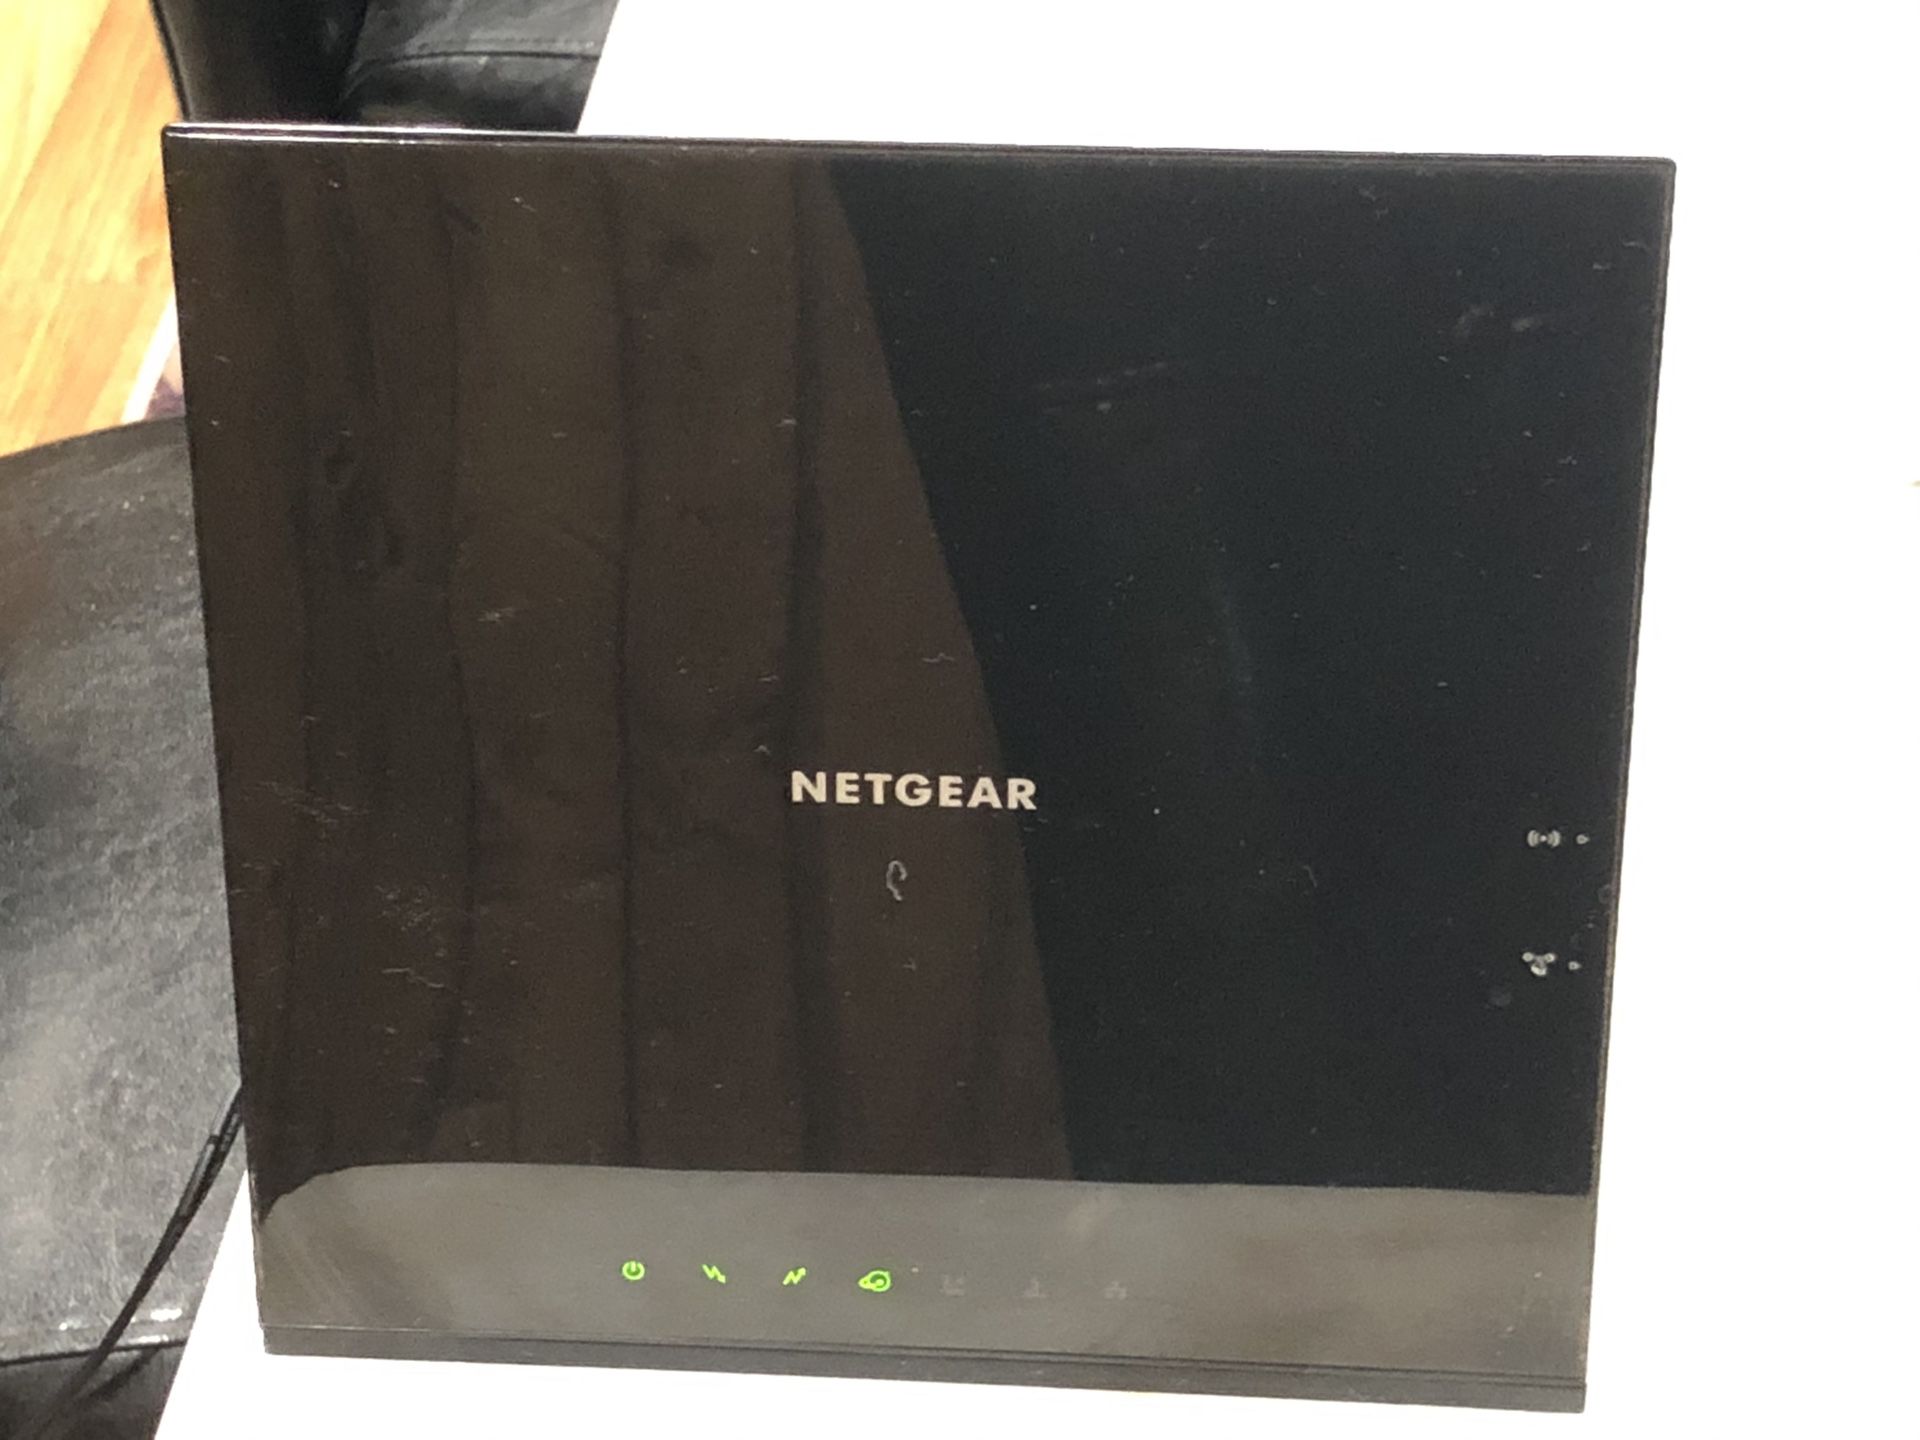 NETGEAR AC1600 Dual Band WiFi Cable Modem Router